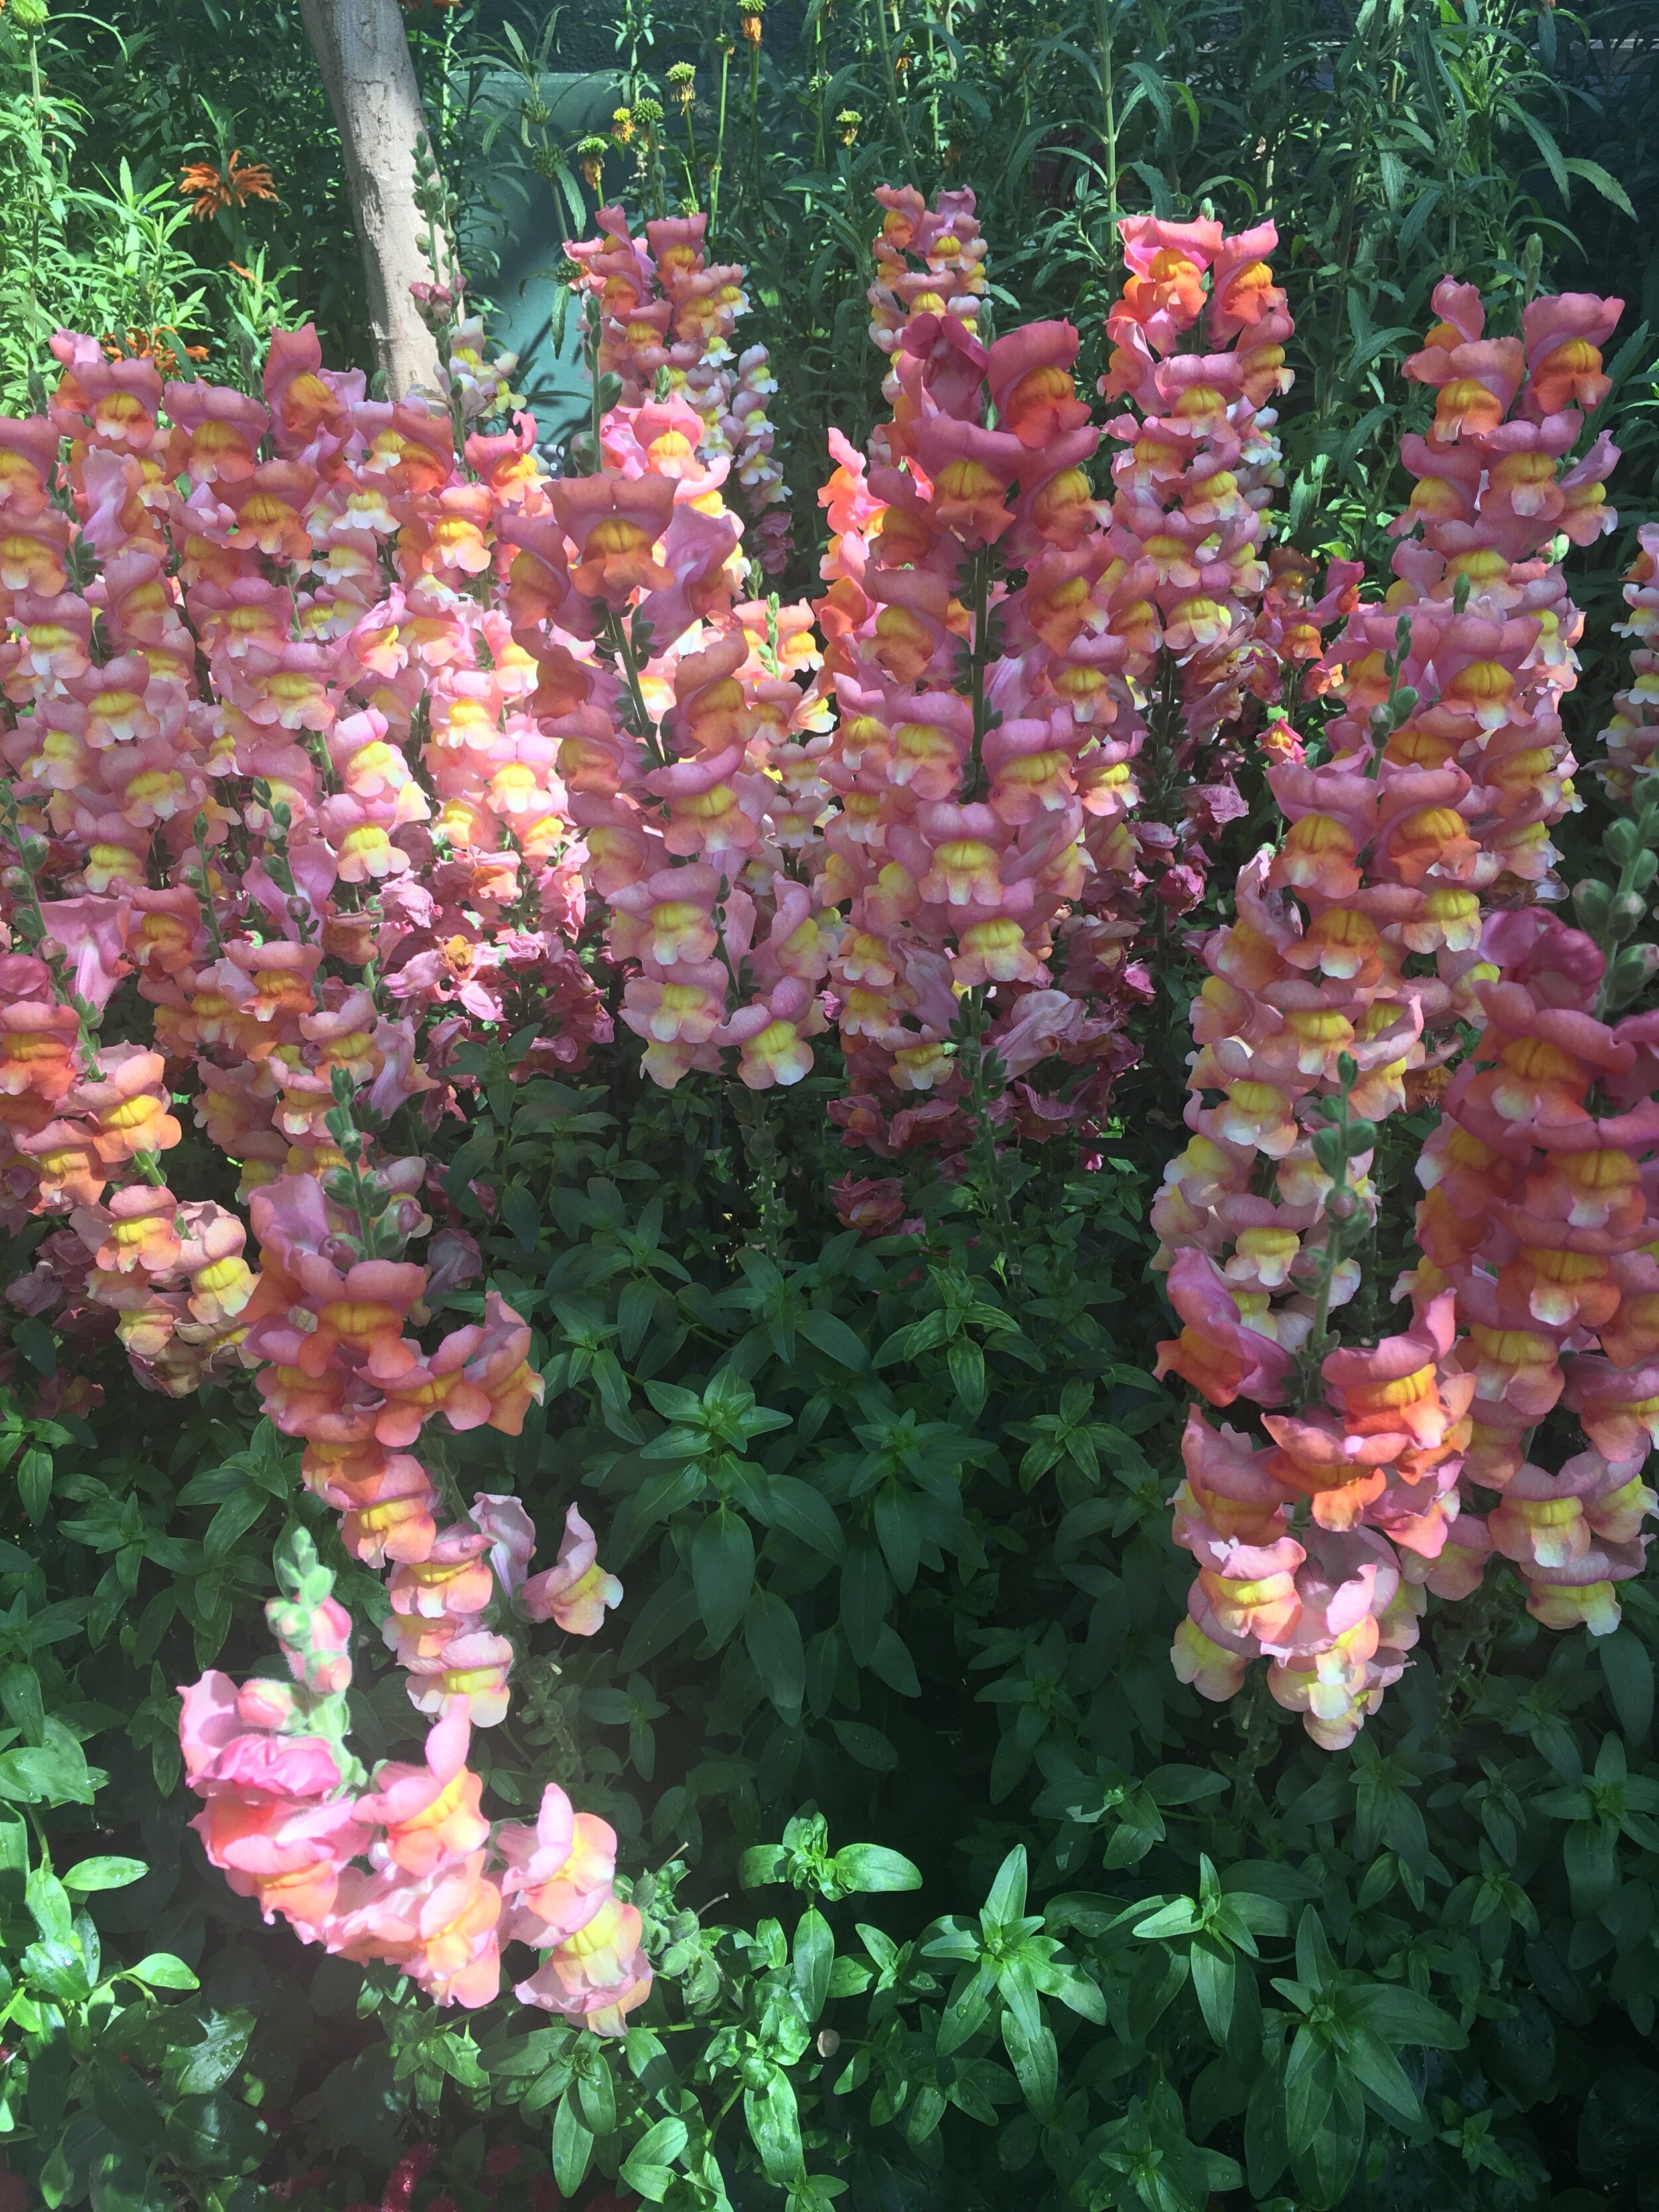  These pink and yellow flowers grow vertically with many petals hanging onto the stem. 